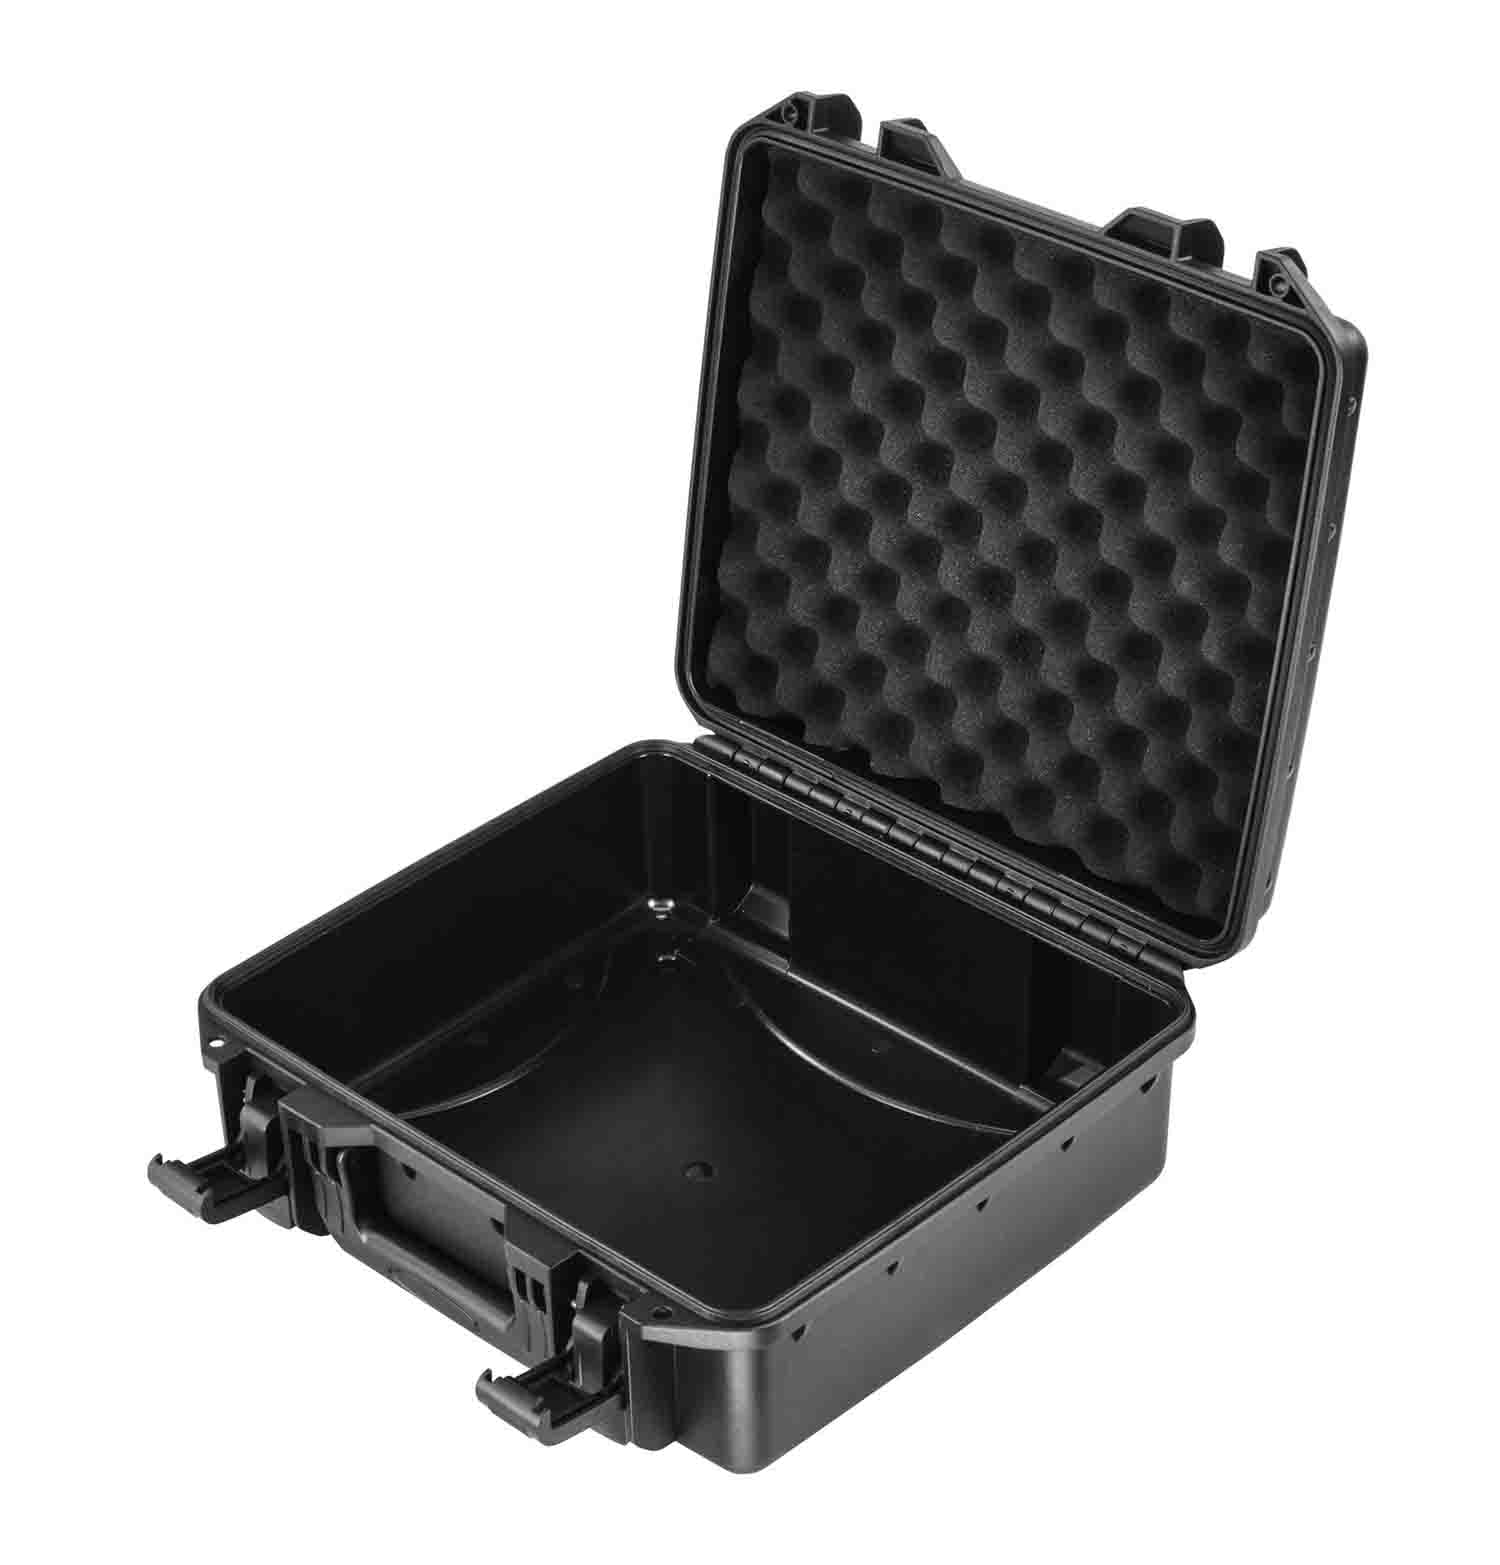 Odyssey VU120905NF Vulcan Injection-Molded Utility Case - 13.75 x 11.75 x 3.75" Interior - Hollywood DJ